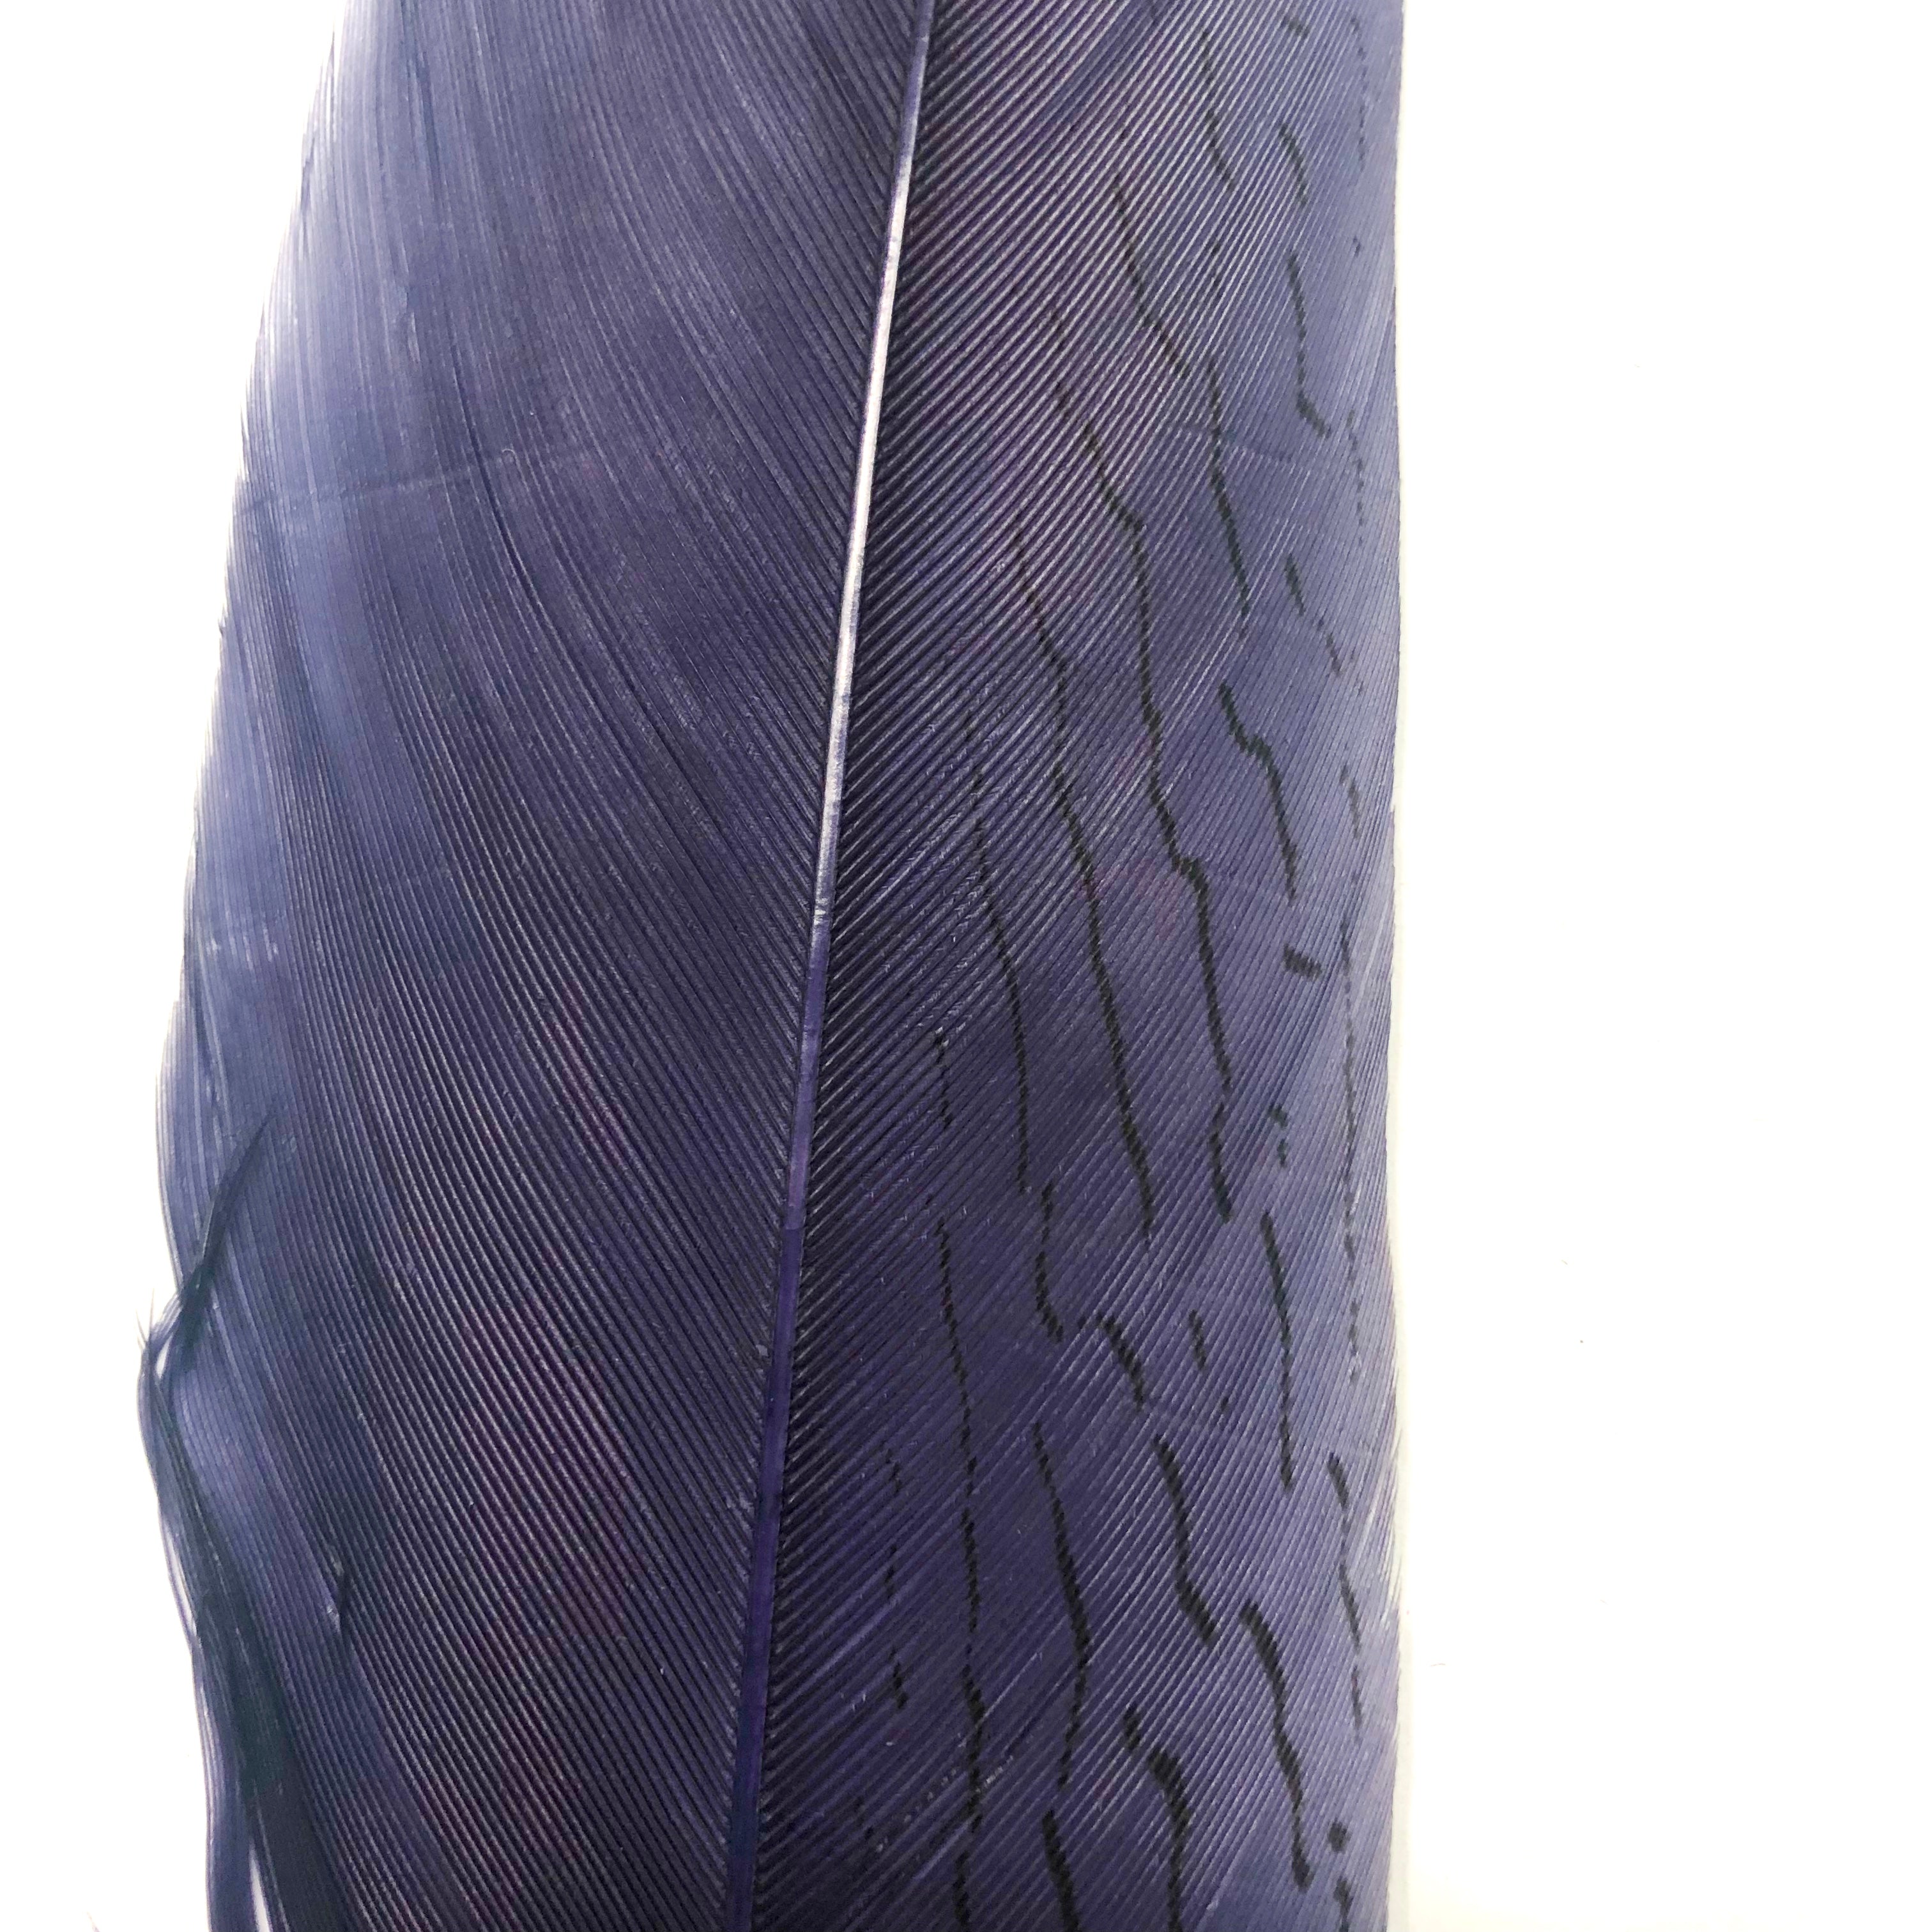 20" To 30" Silver Pheasant Tail Feather - Navy Blue ((SECONDS))